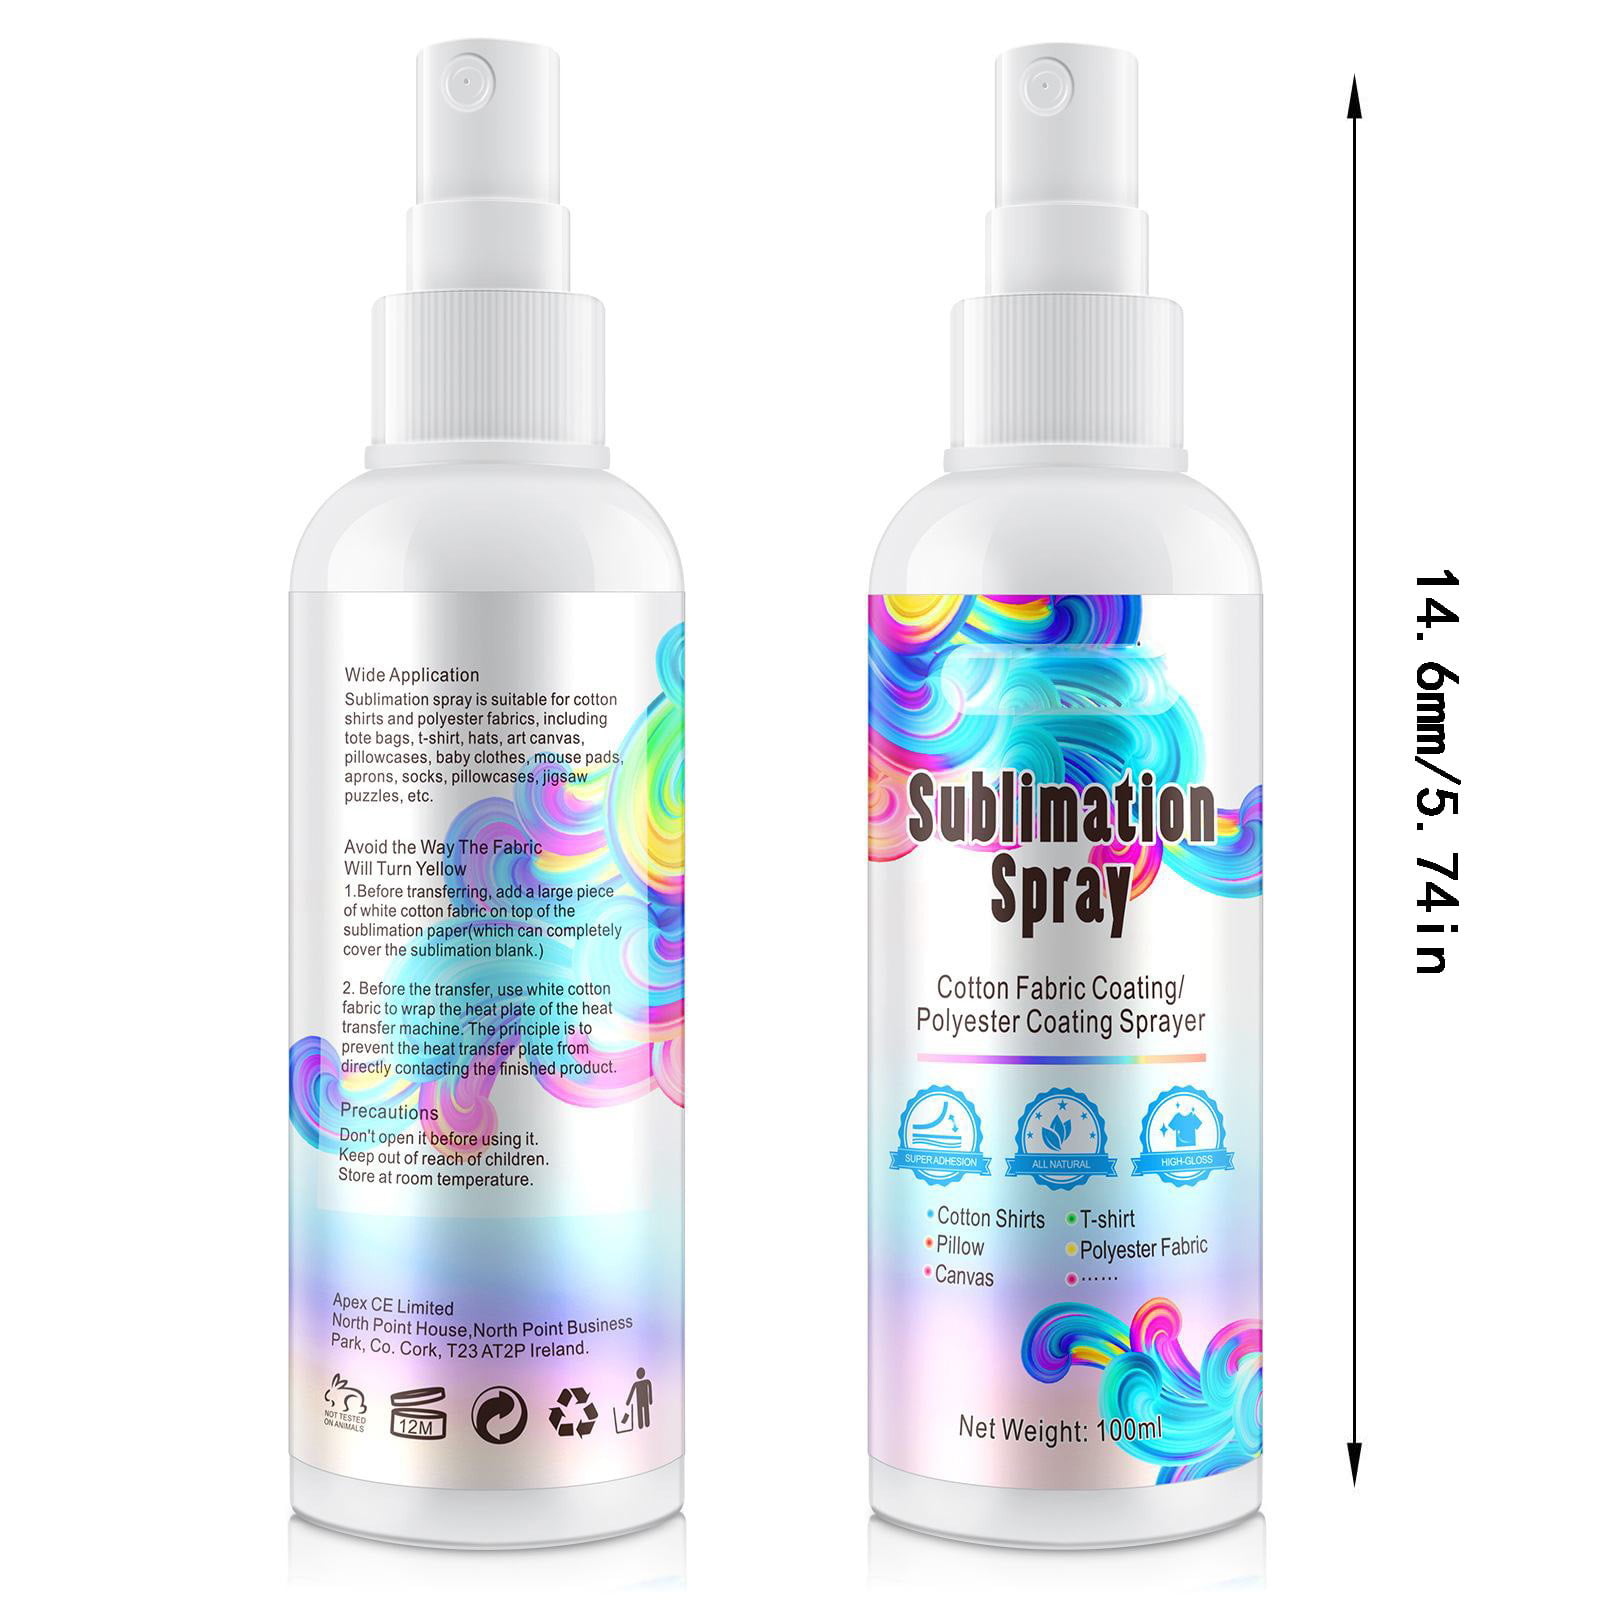 2x100ml Sublimation Spray, Sublimation Coating Spray for All Fabric,  Including 100% Cotton, Polyester, Carton, Tote Bag, Pillows, Mugs, Canvas,  Quick